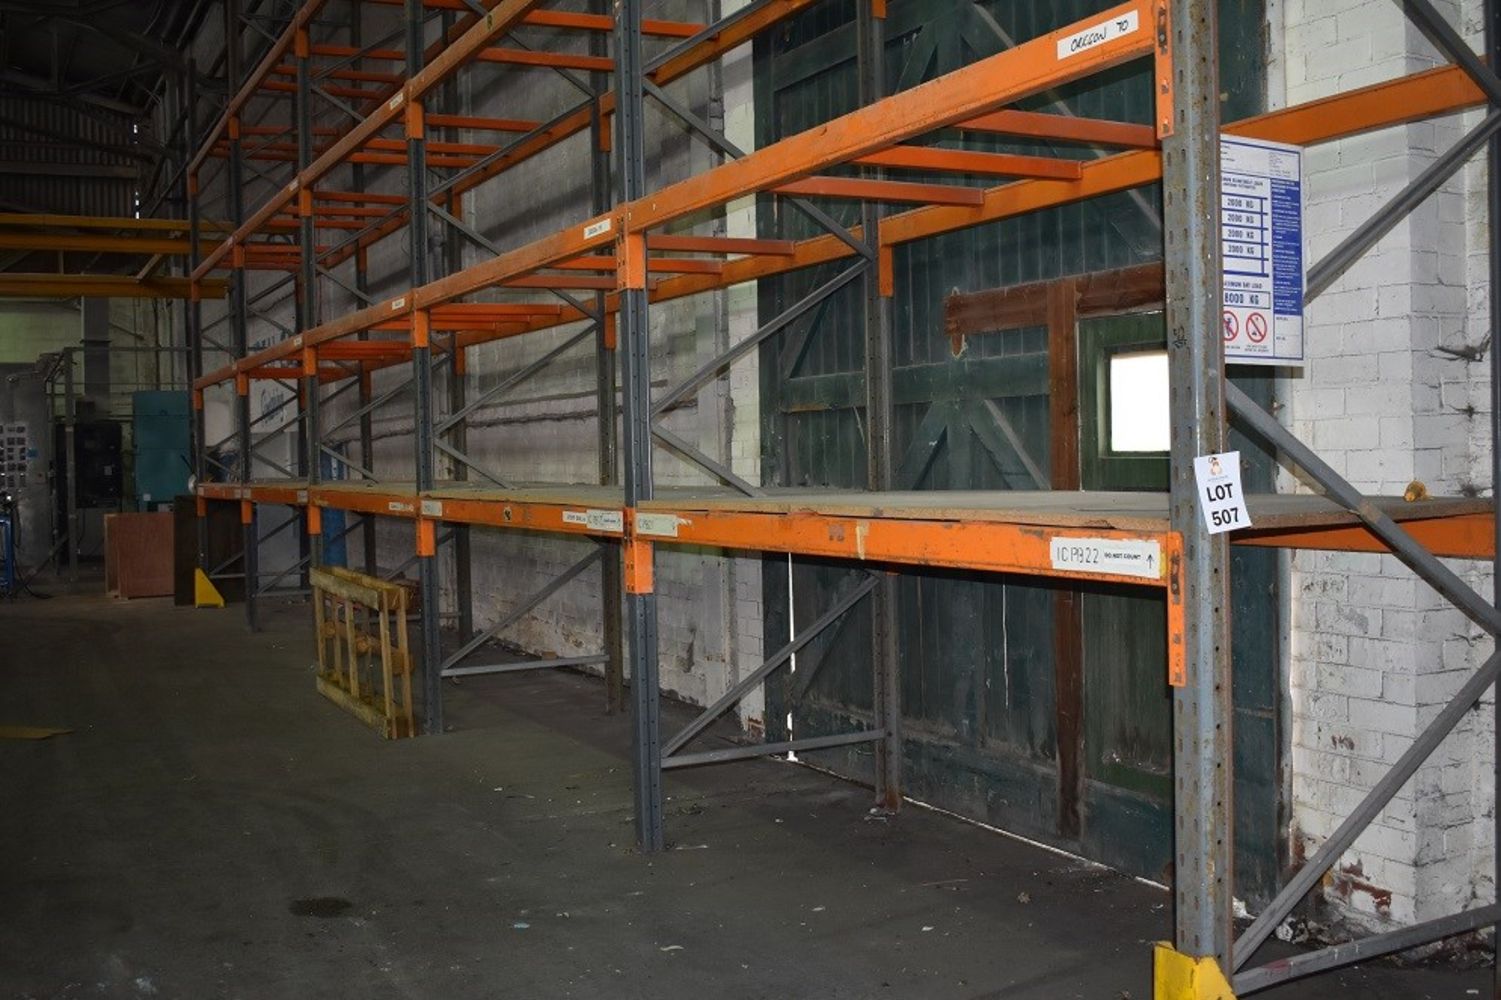 Bays of Pallet Racking - Various Heights